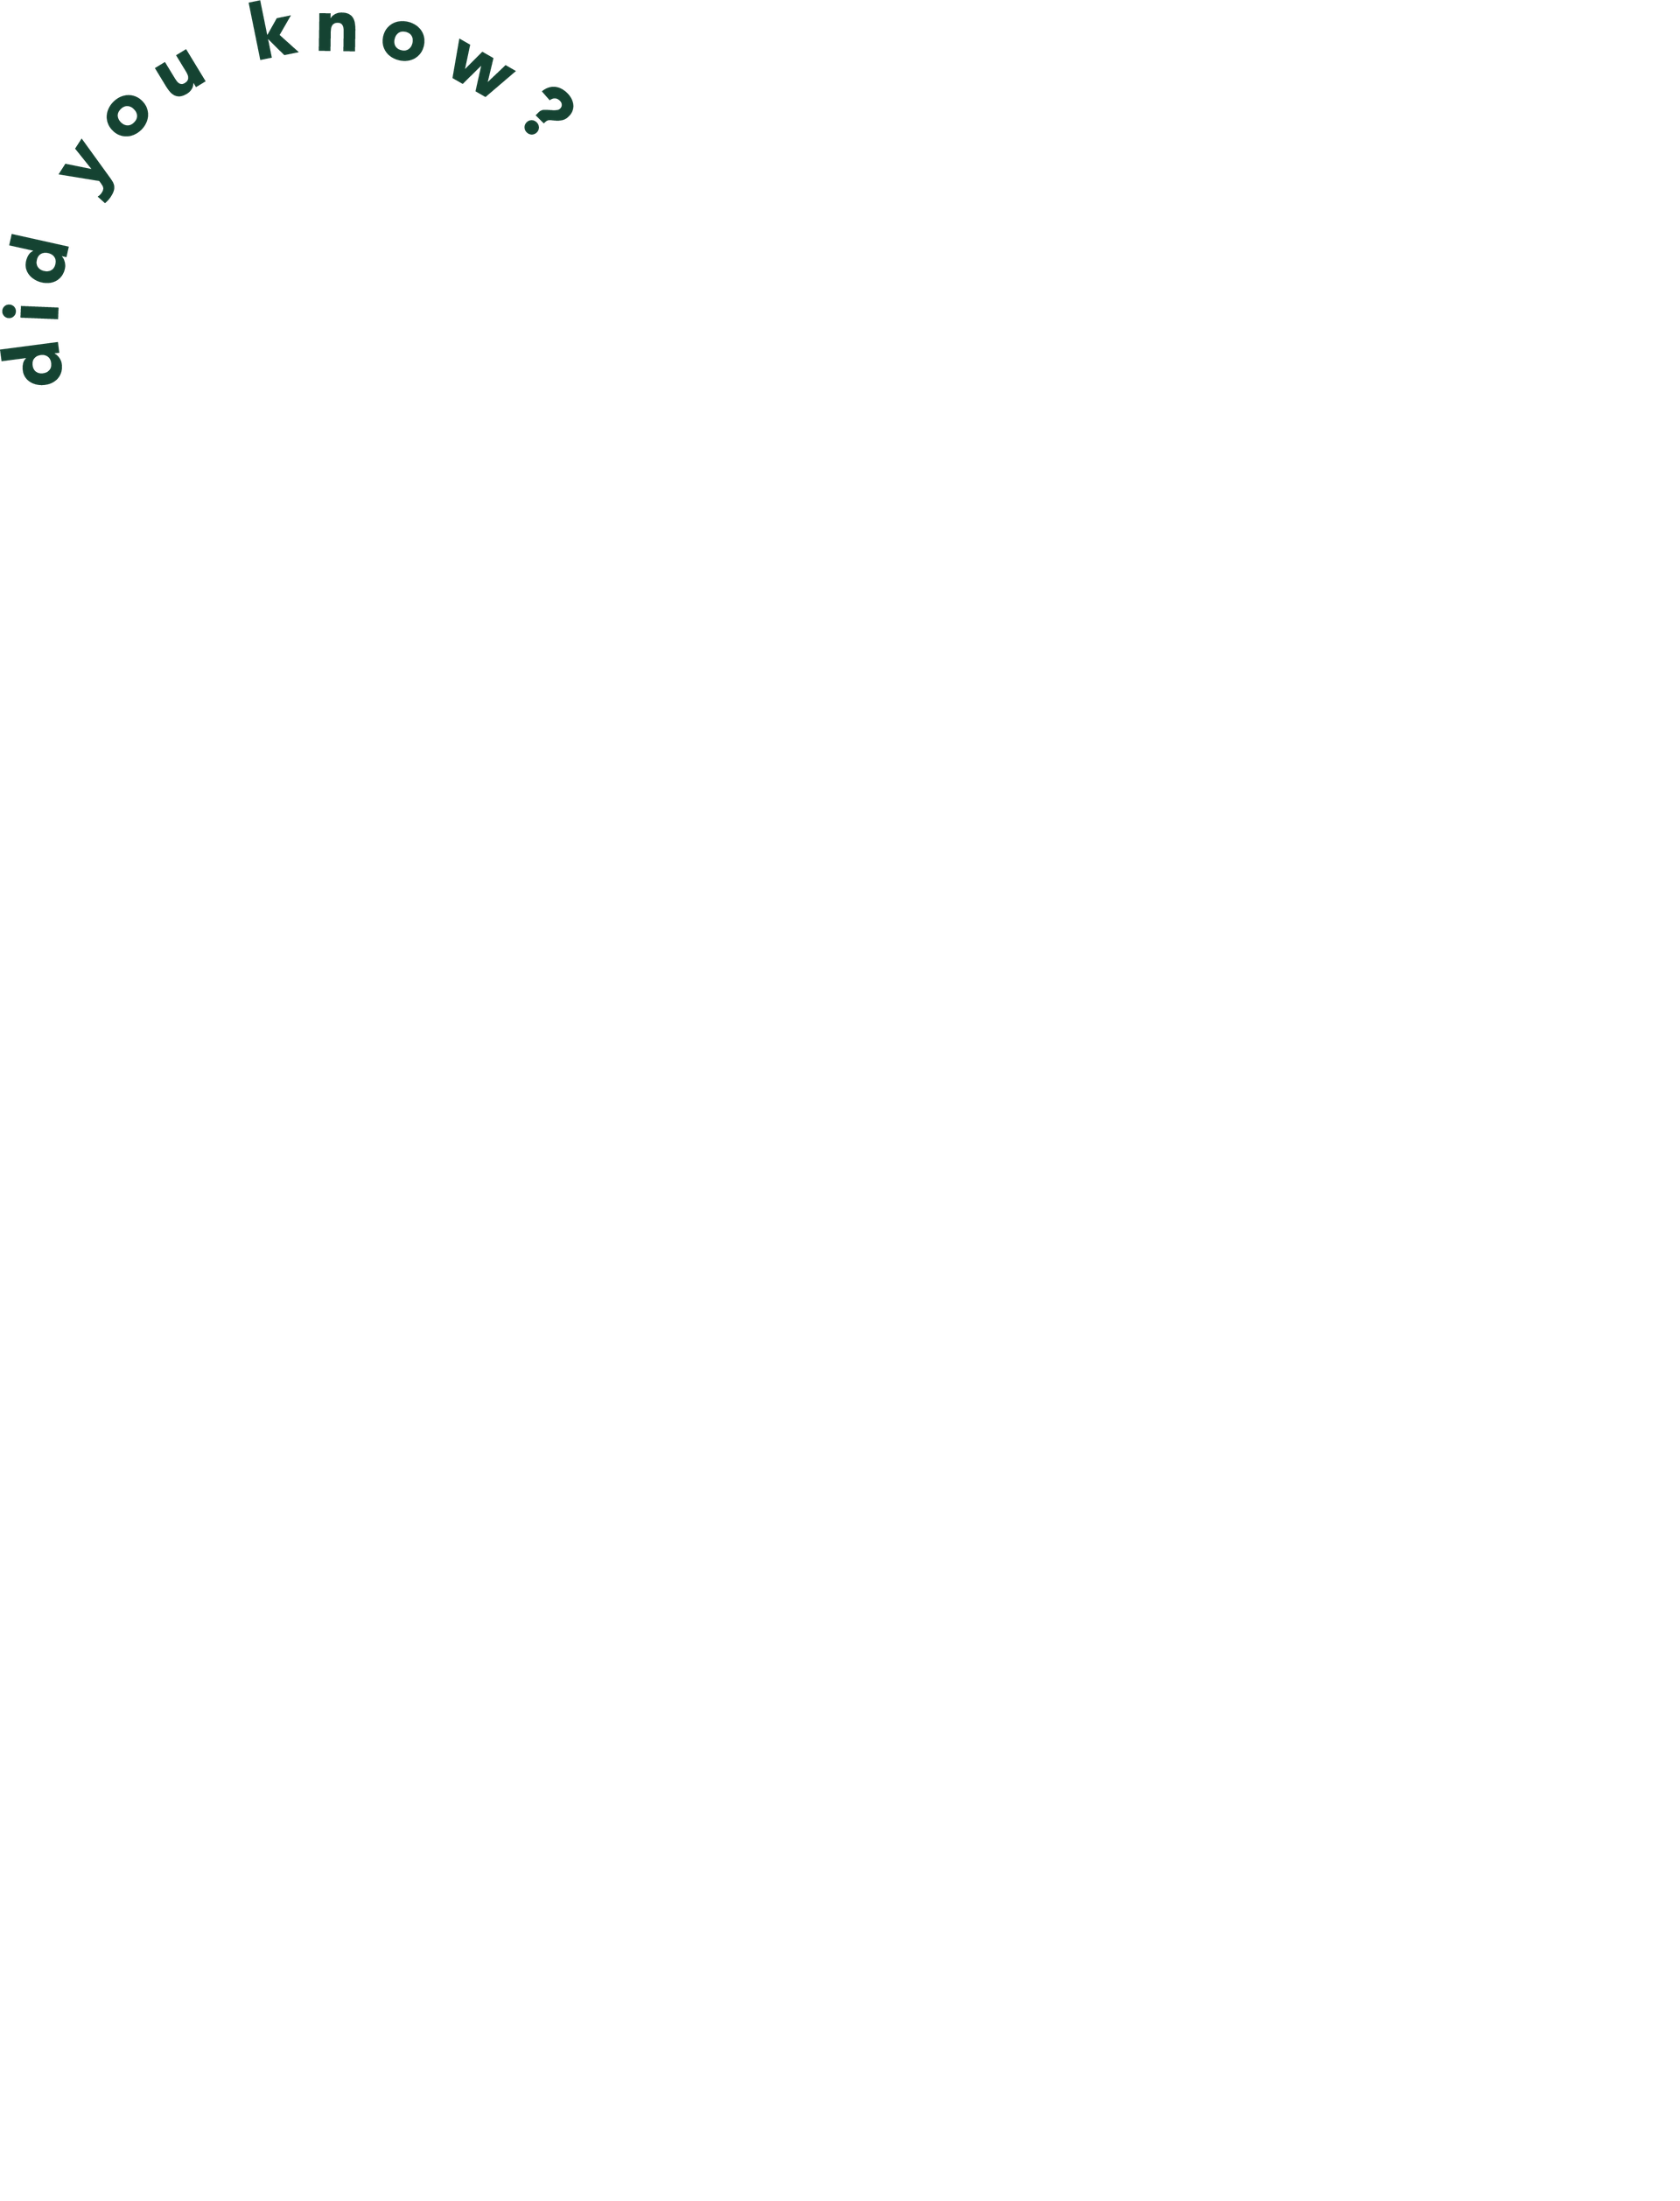 Did you know? Our organic drinks are shelf stable.